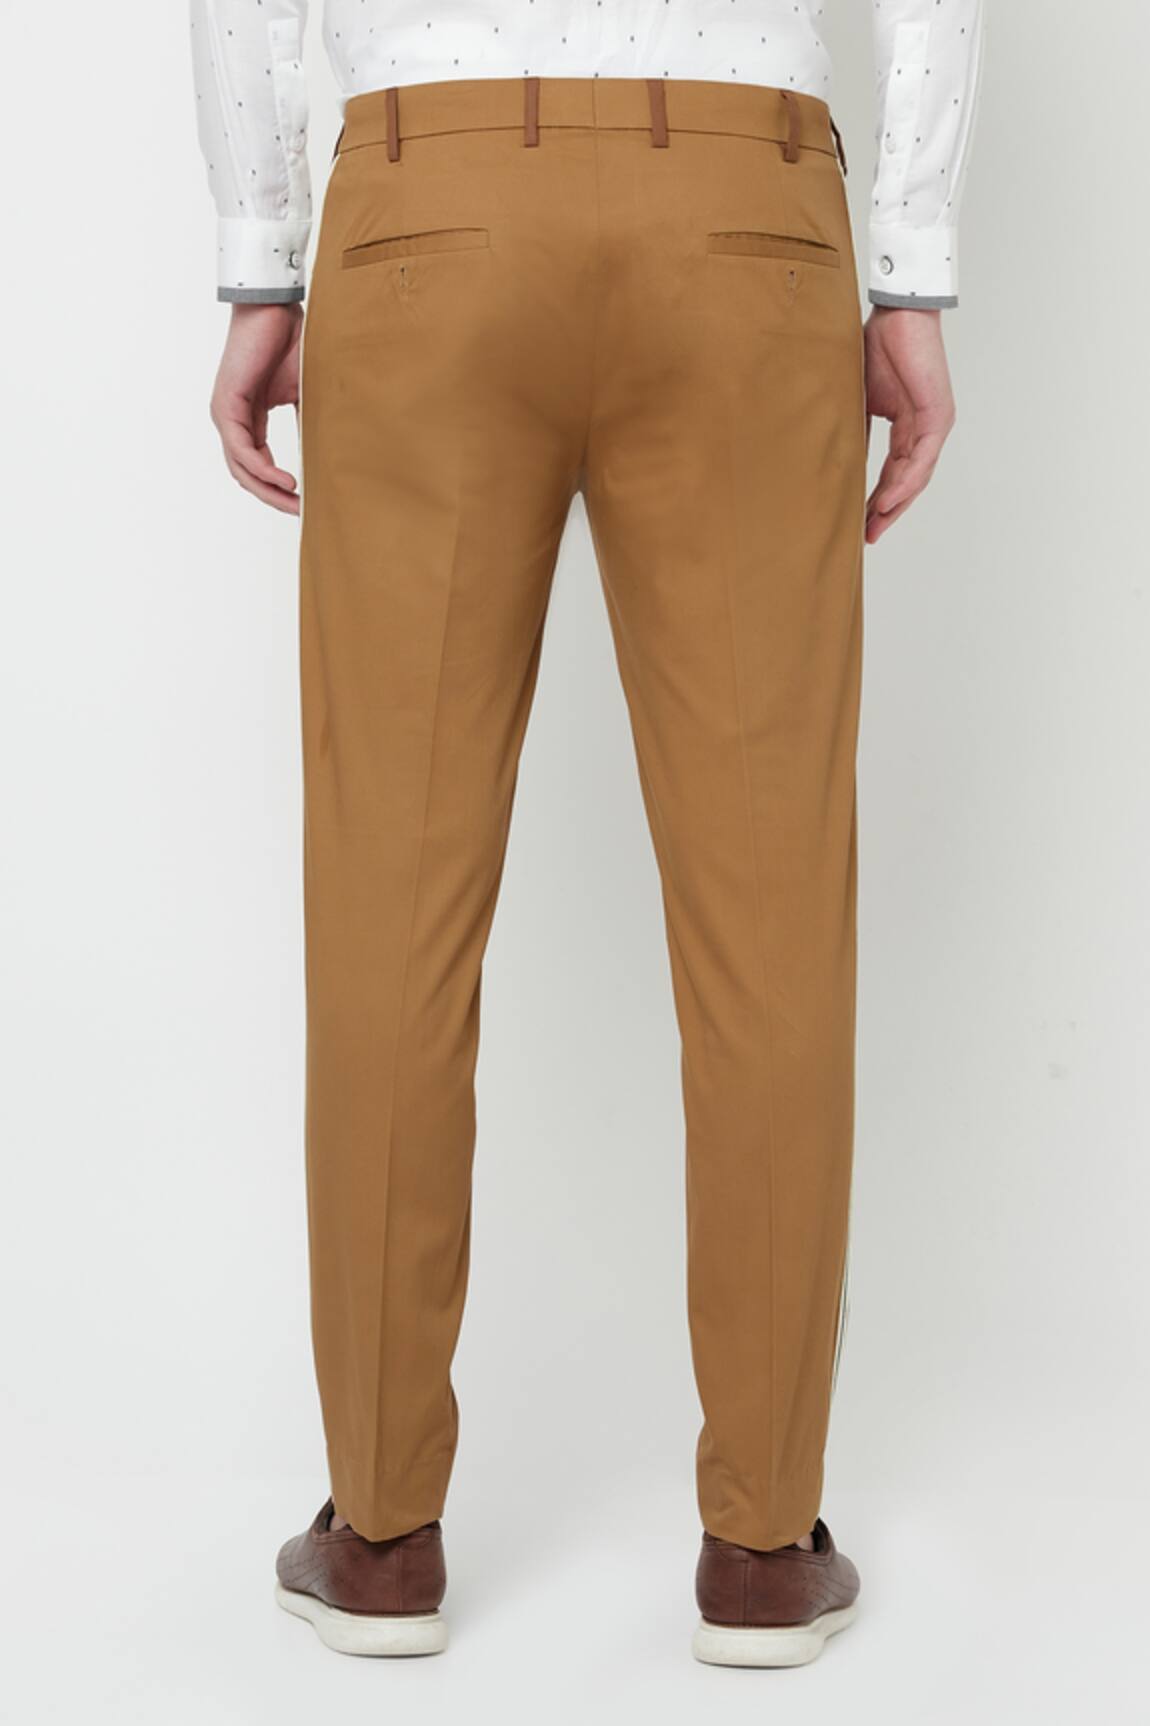 Van Heusen Trousers  Chinos Brown Pleated Cotton Trousers for Men at  Vanheusenindiacom